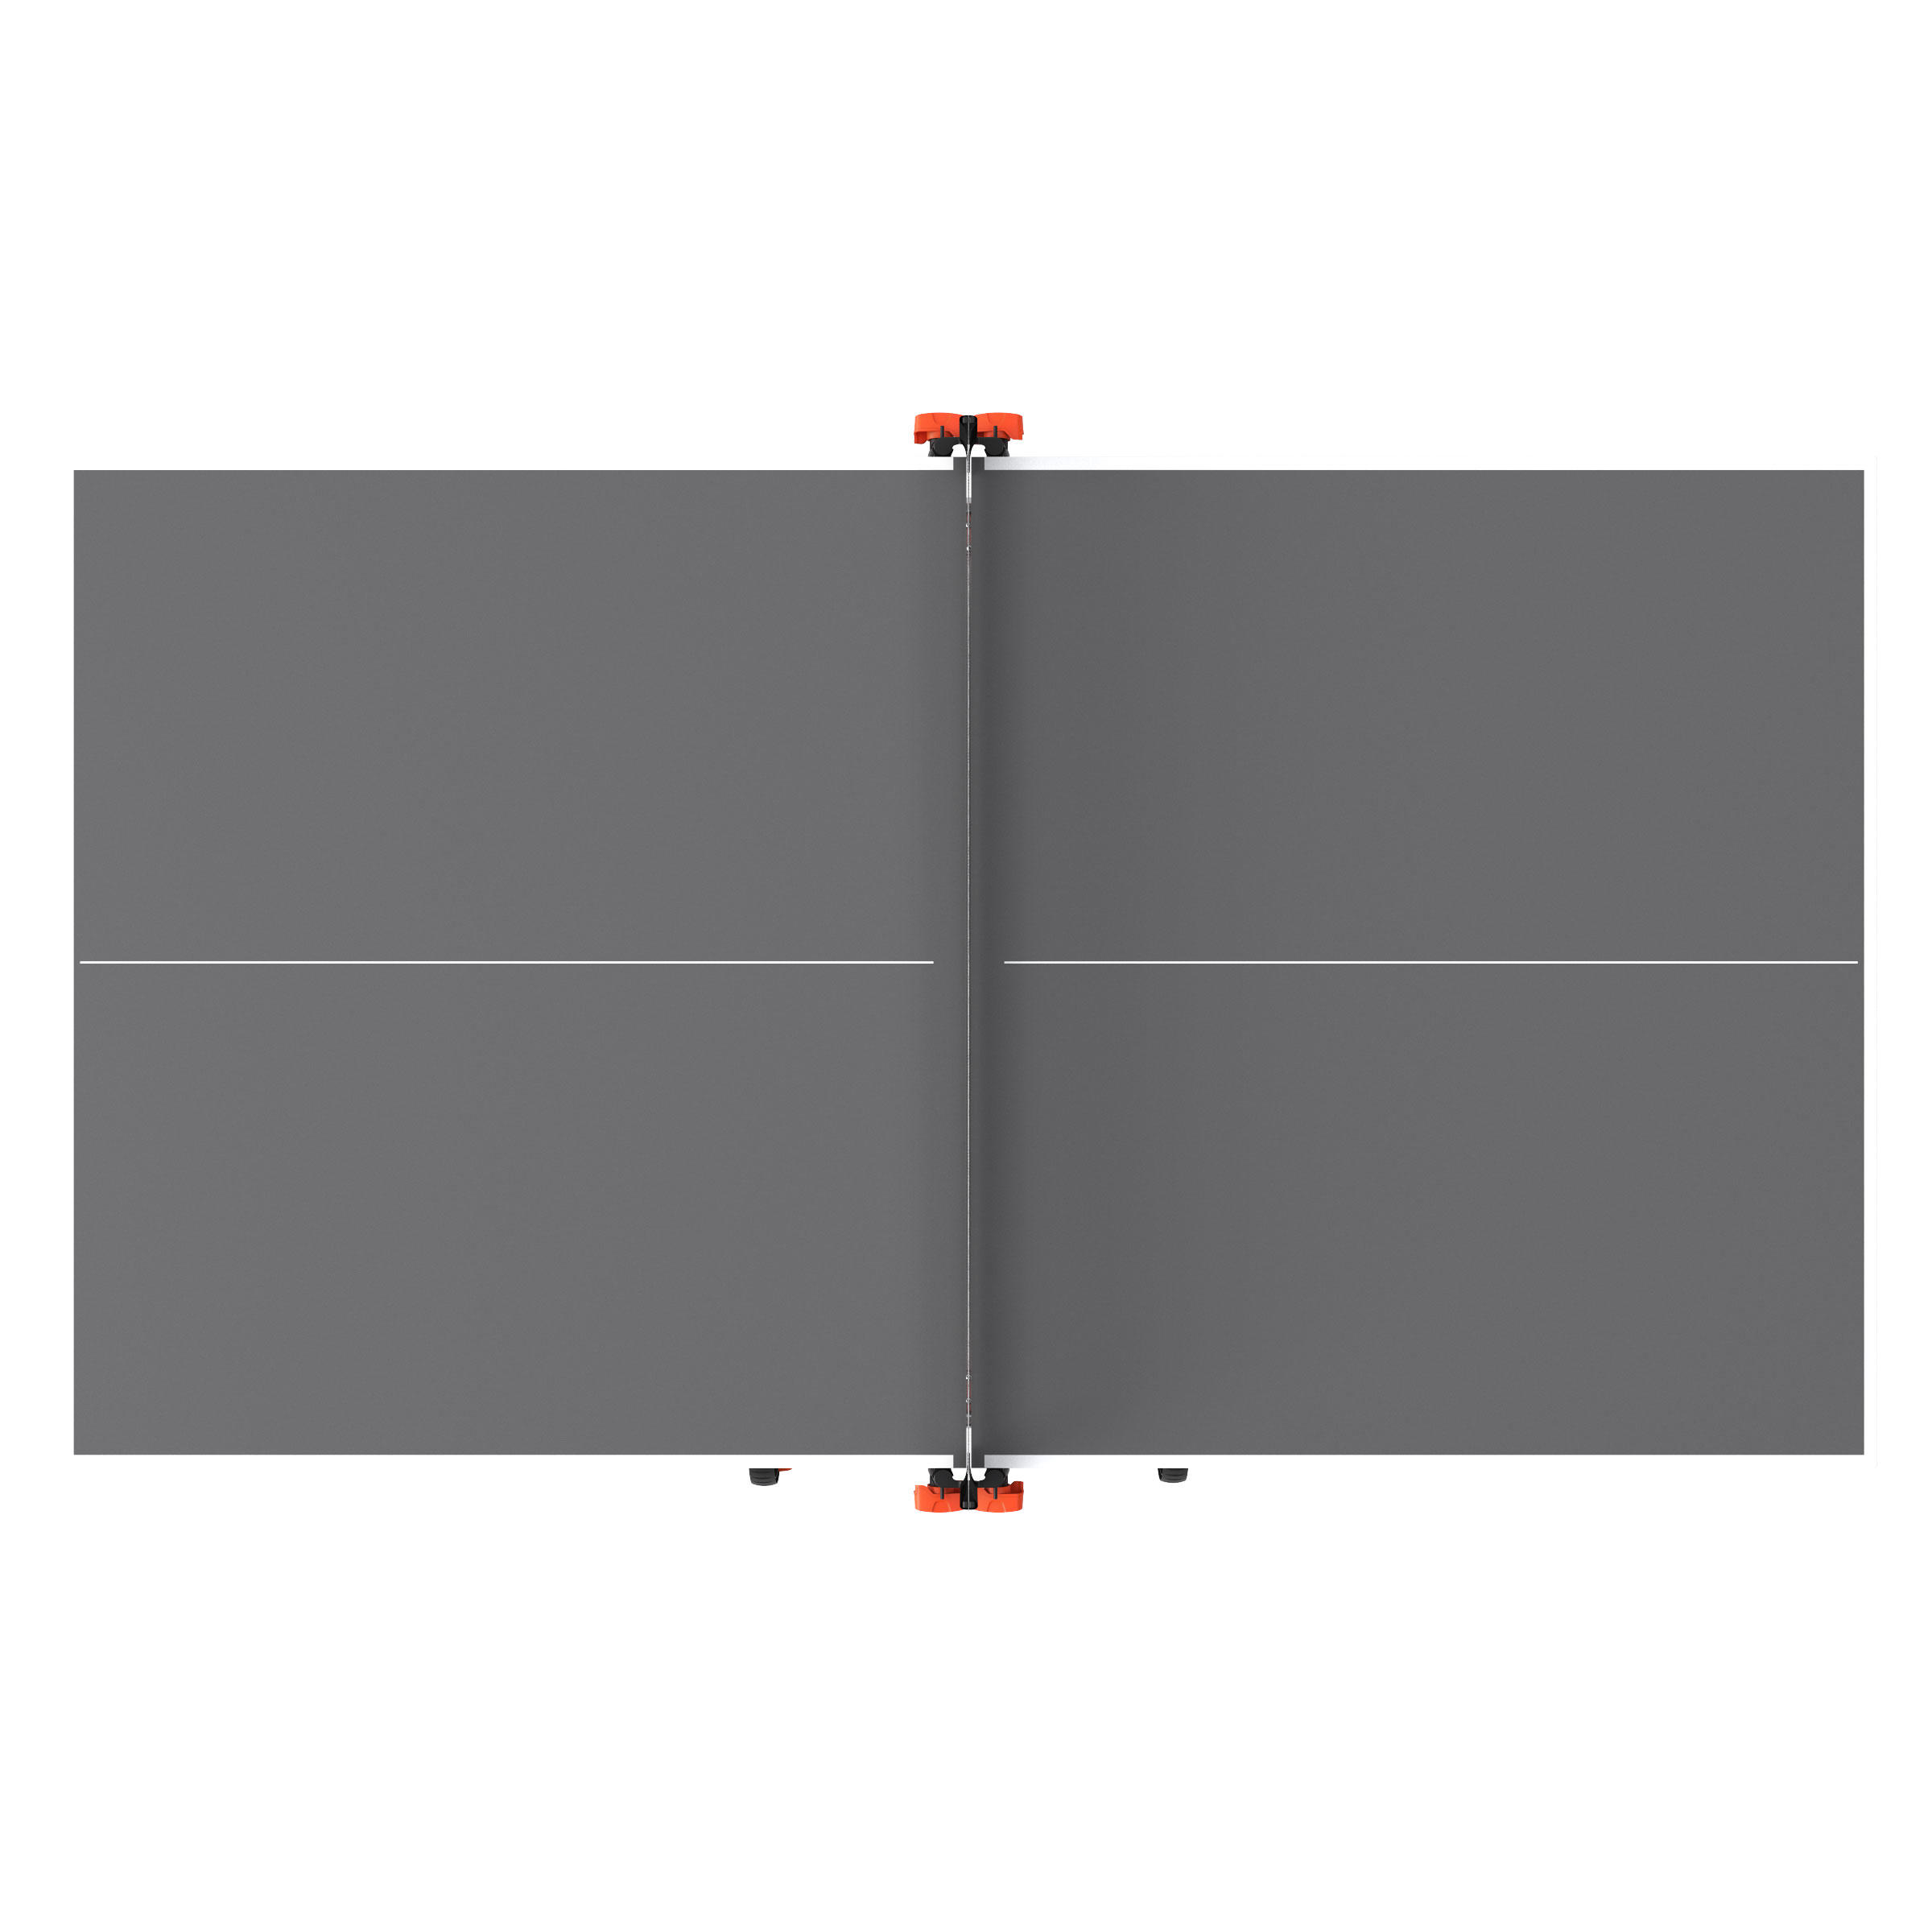 Outdoor Table Tennis Table PPT 530 - Grey 8/12